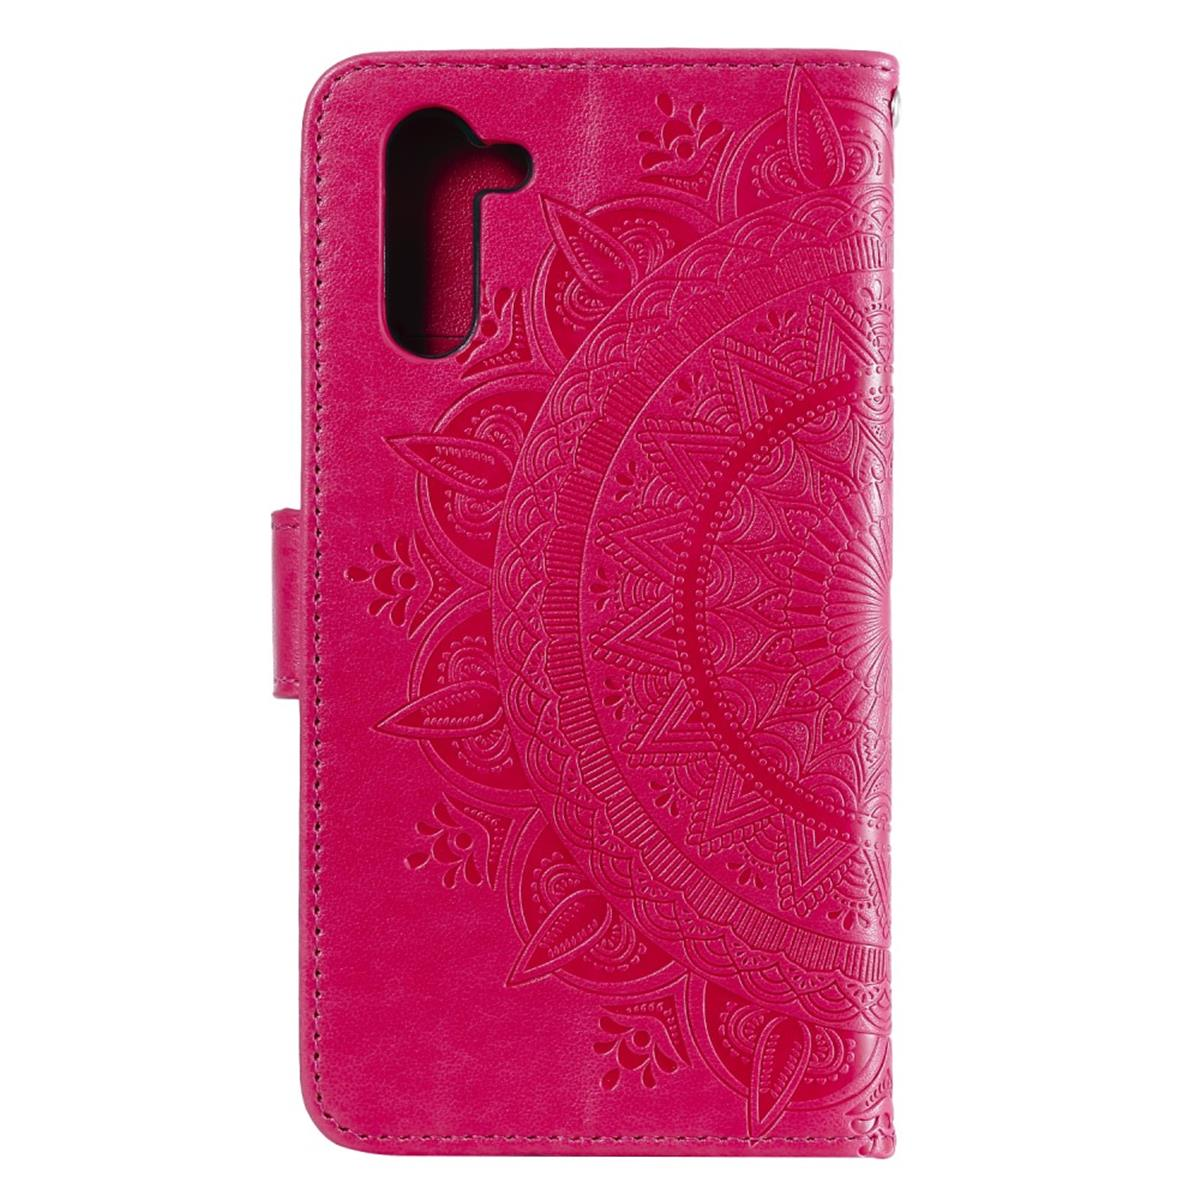 COVERKINGZ Klapphülle Mandala Galaxy Samsung, Muster, mit Bookcover, Pink Note10